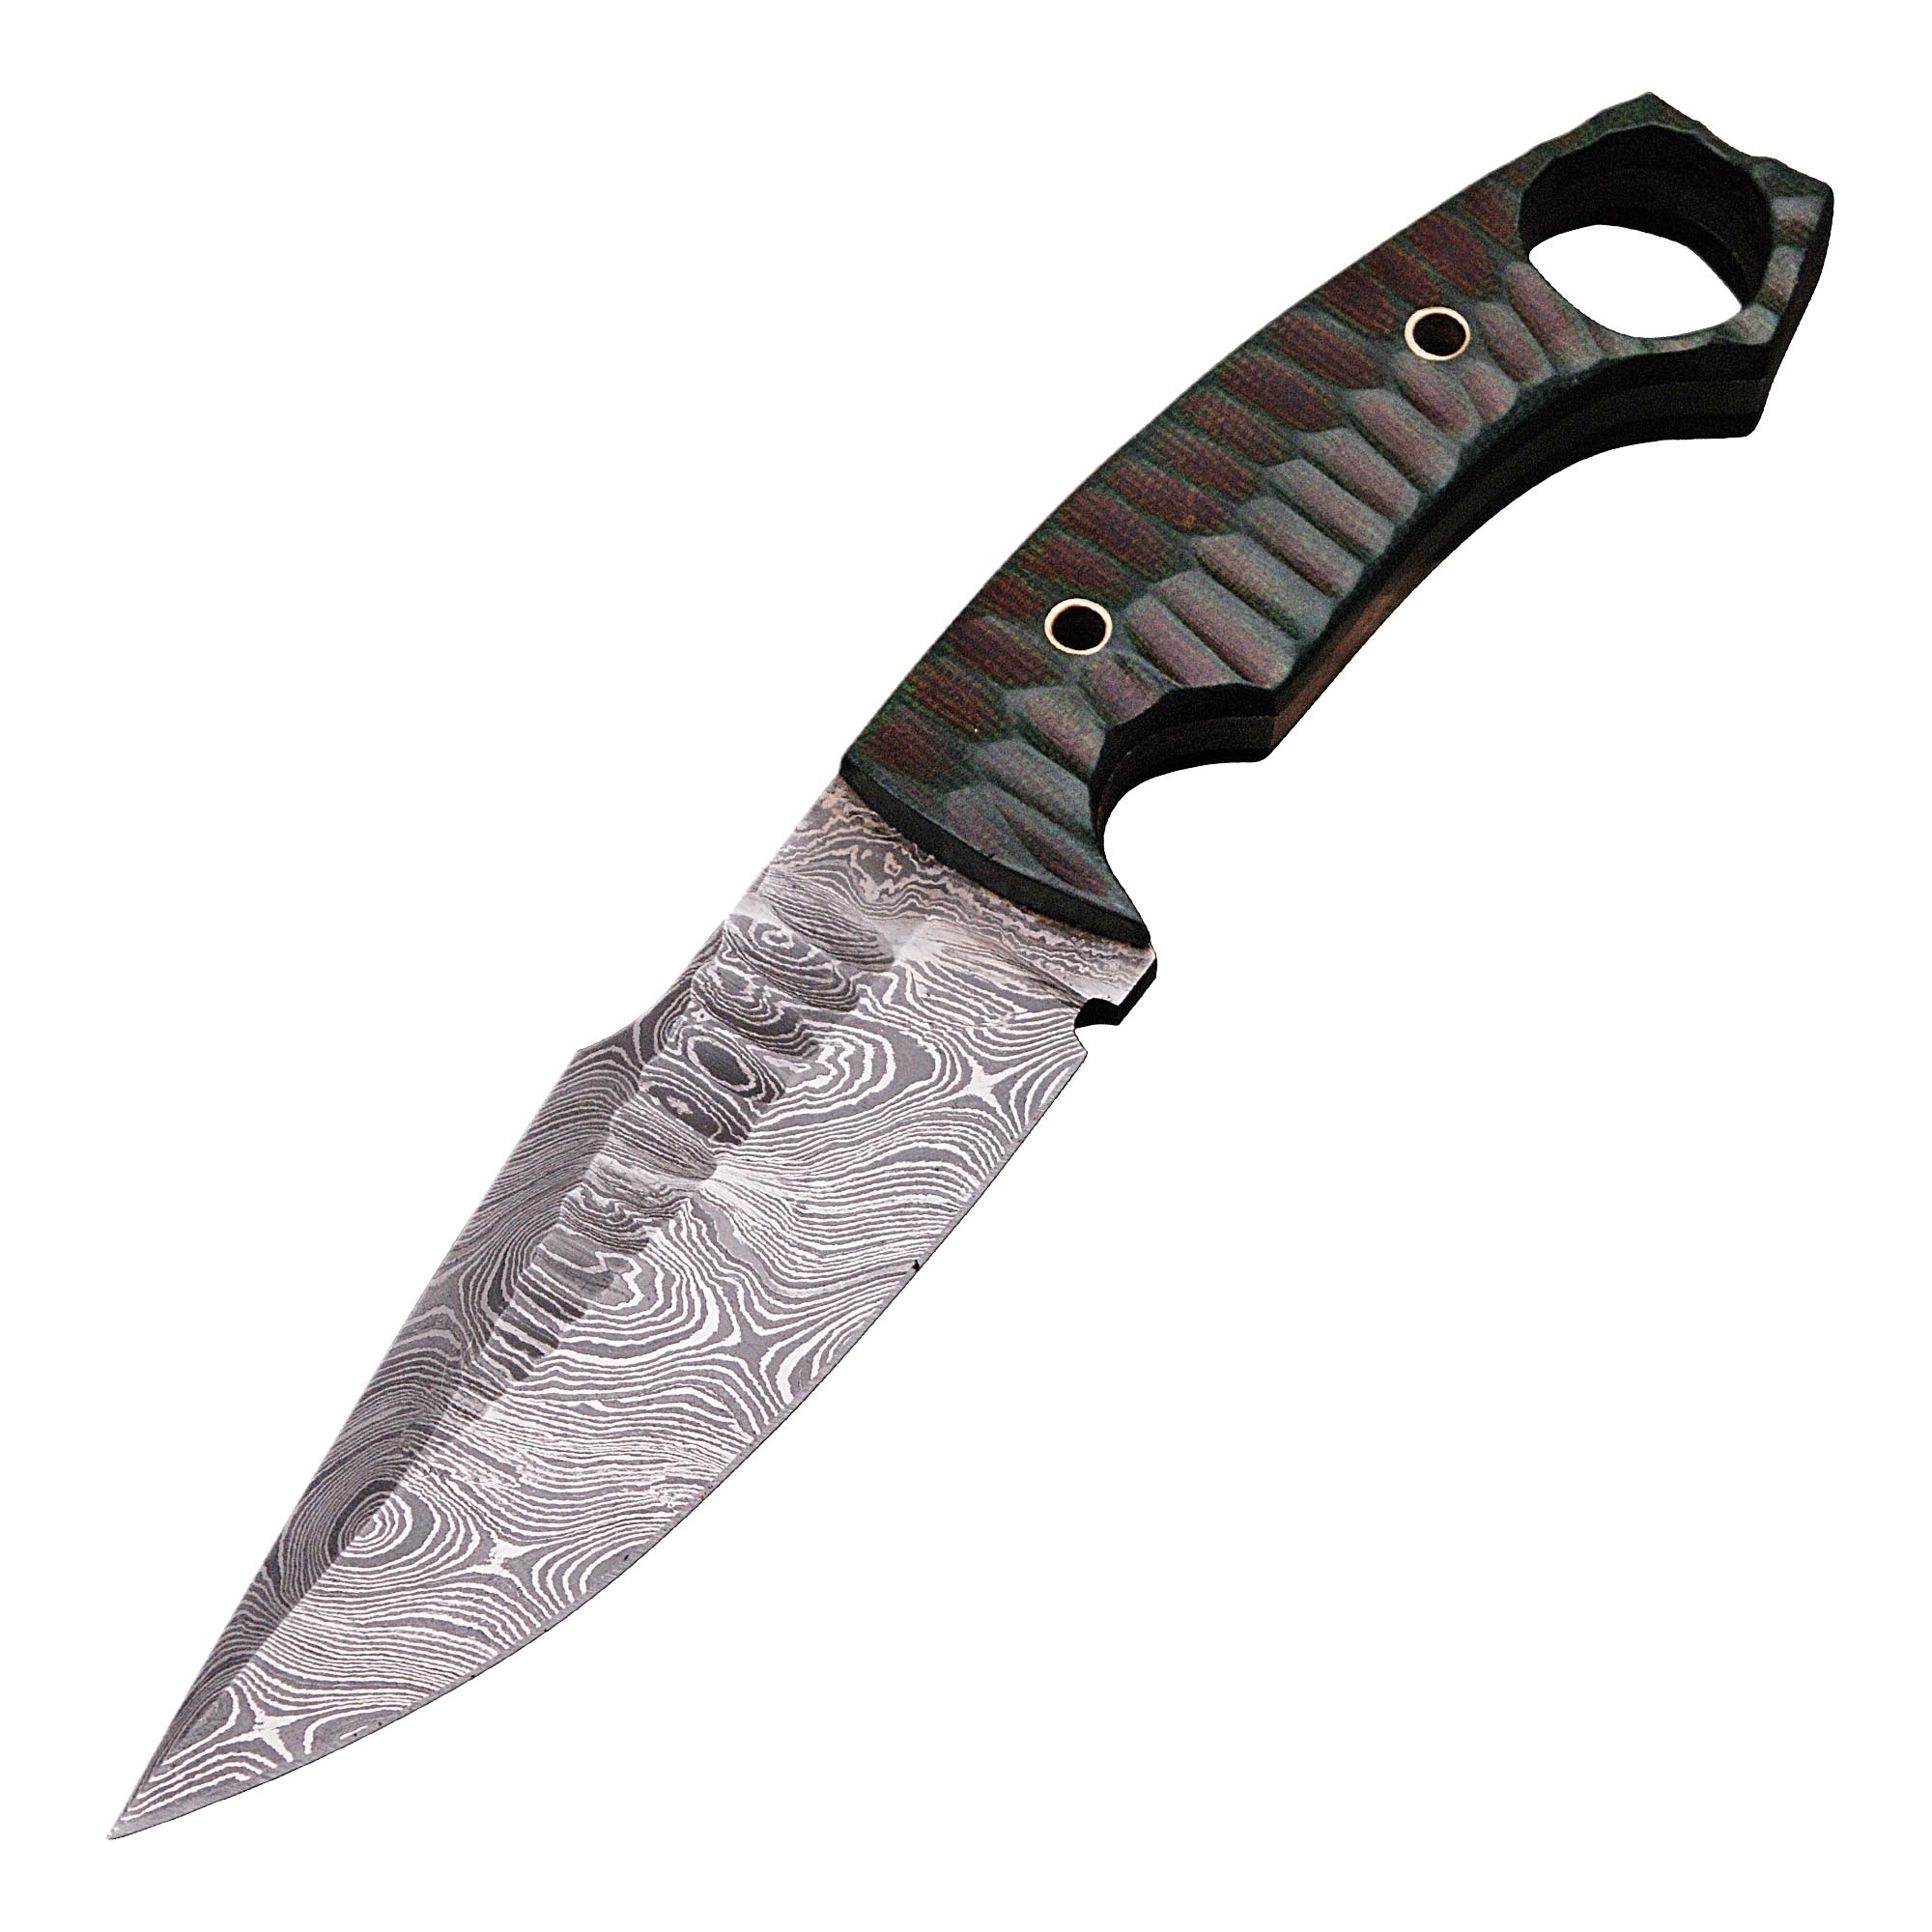 He Who Dwells in the Swamp Damascus Steel Tactical Fixed Blade Hunting KNIFE